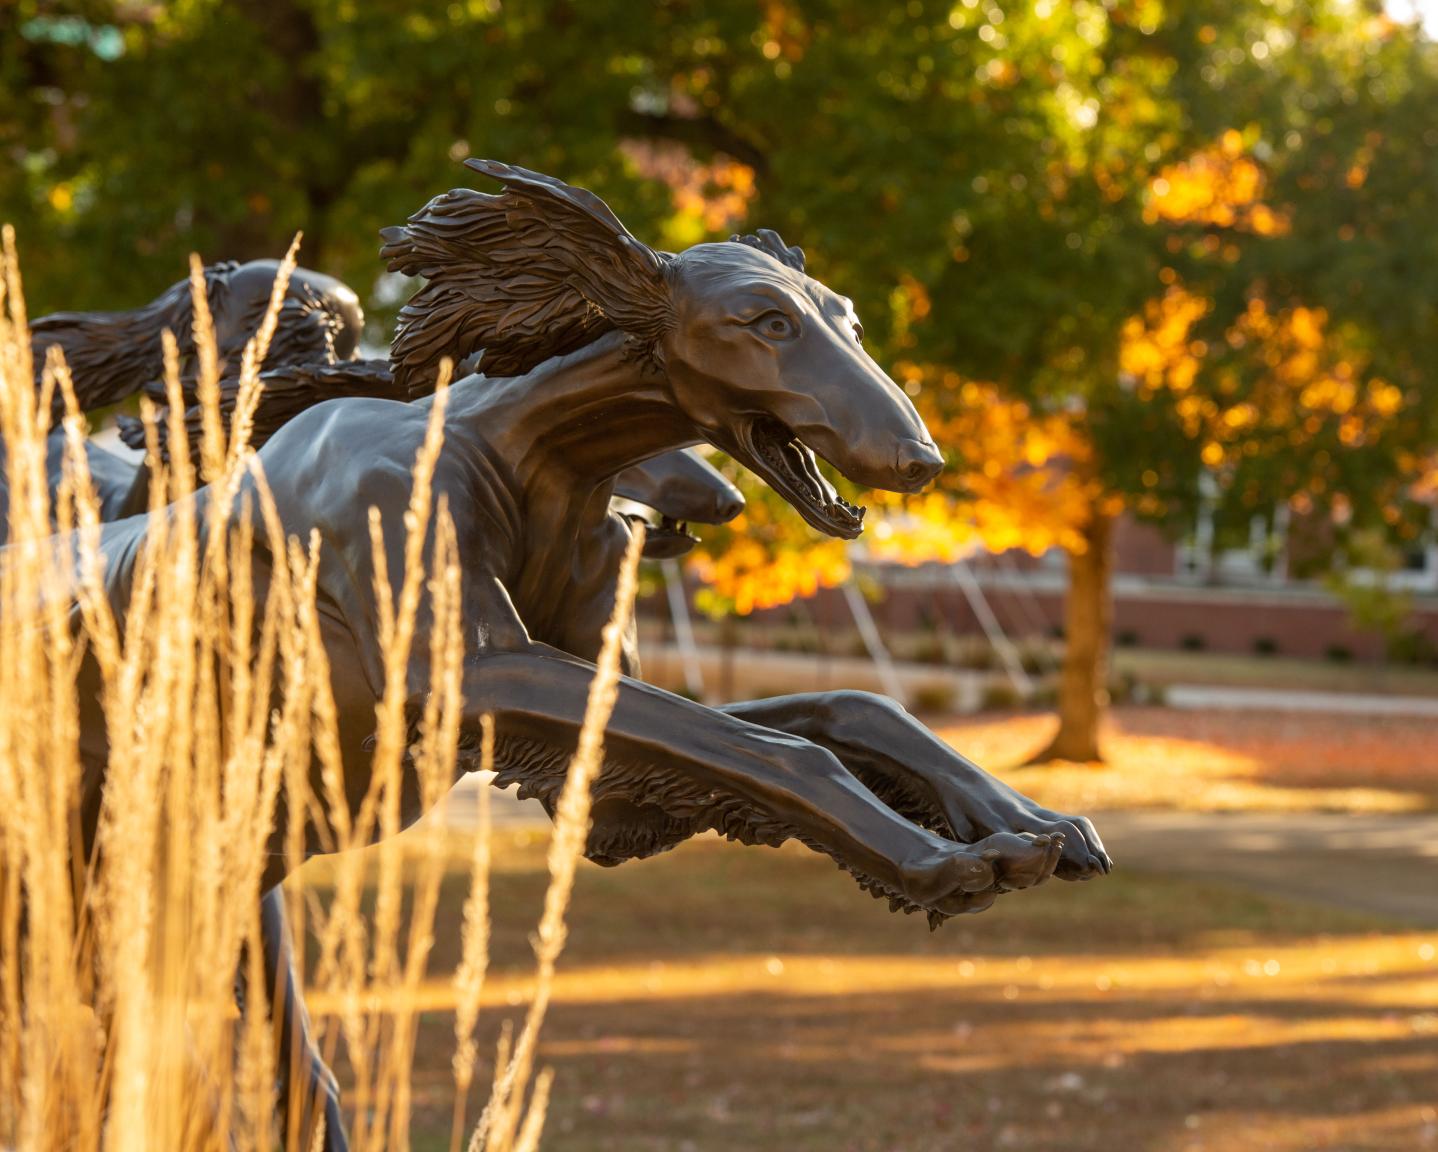 Image of the SIU Saluki Statue in the Alumni Courtyard on SIU Carbondale Campus on a sunny fall day